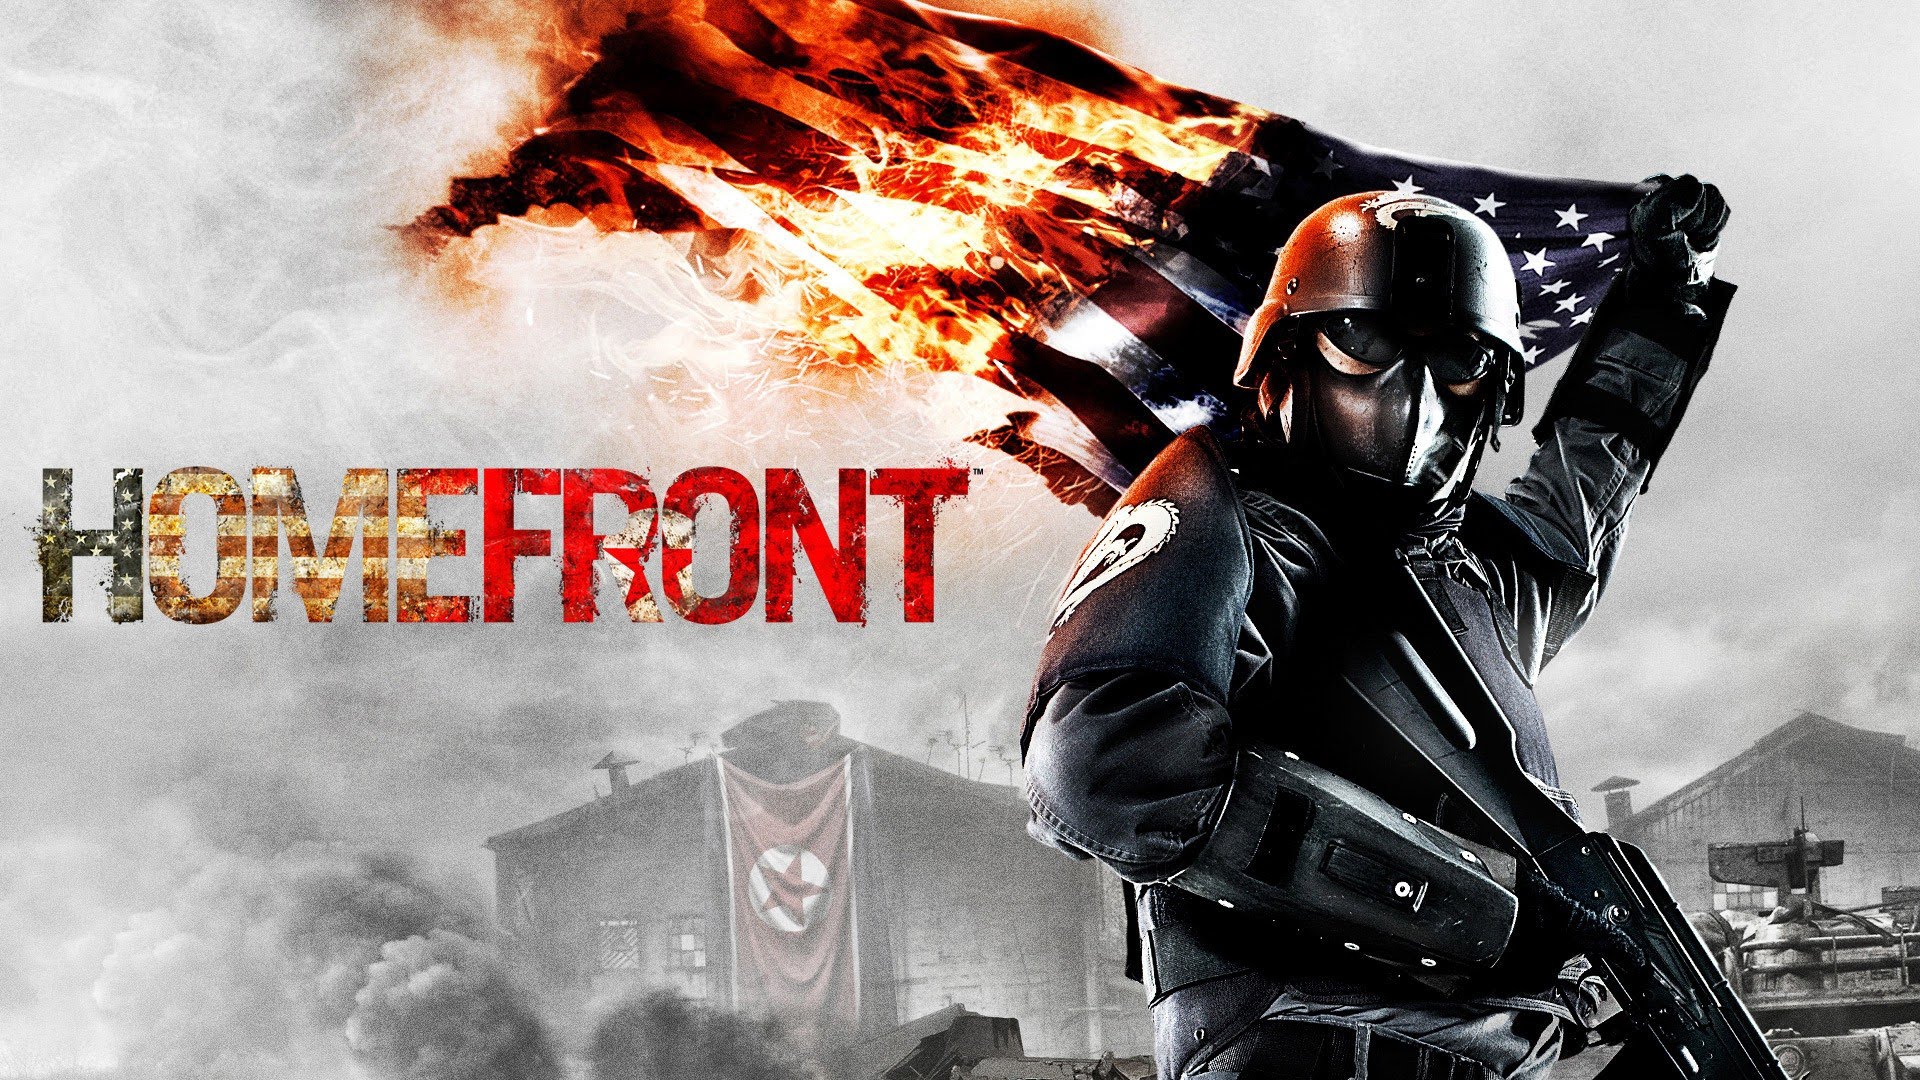 Homefront HD Wallpaper And Background Image